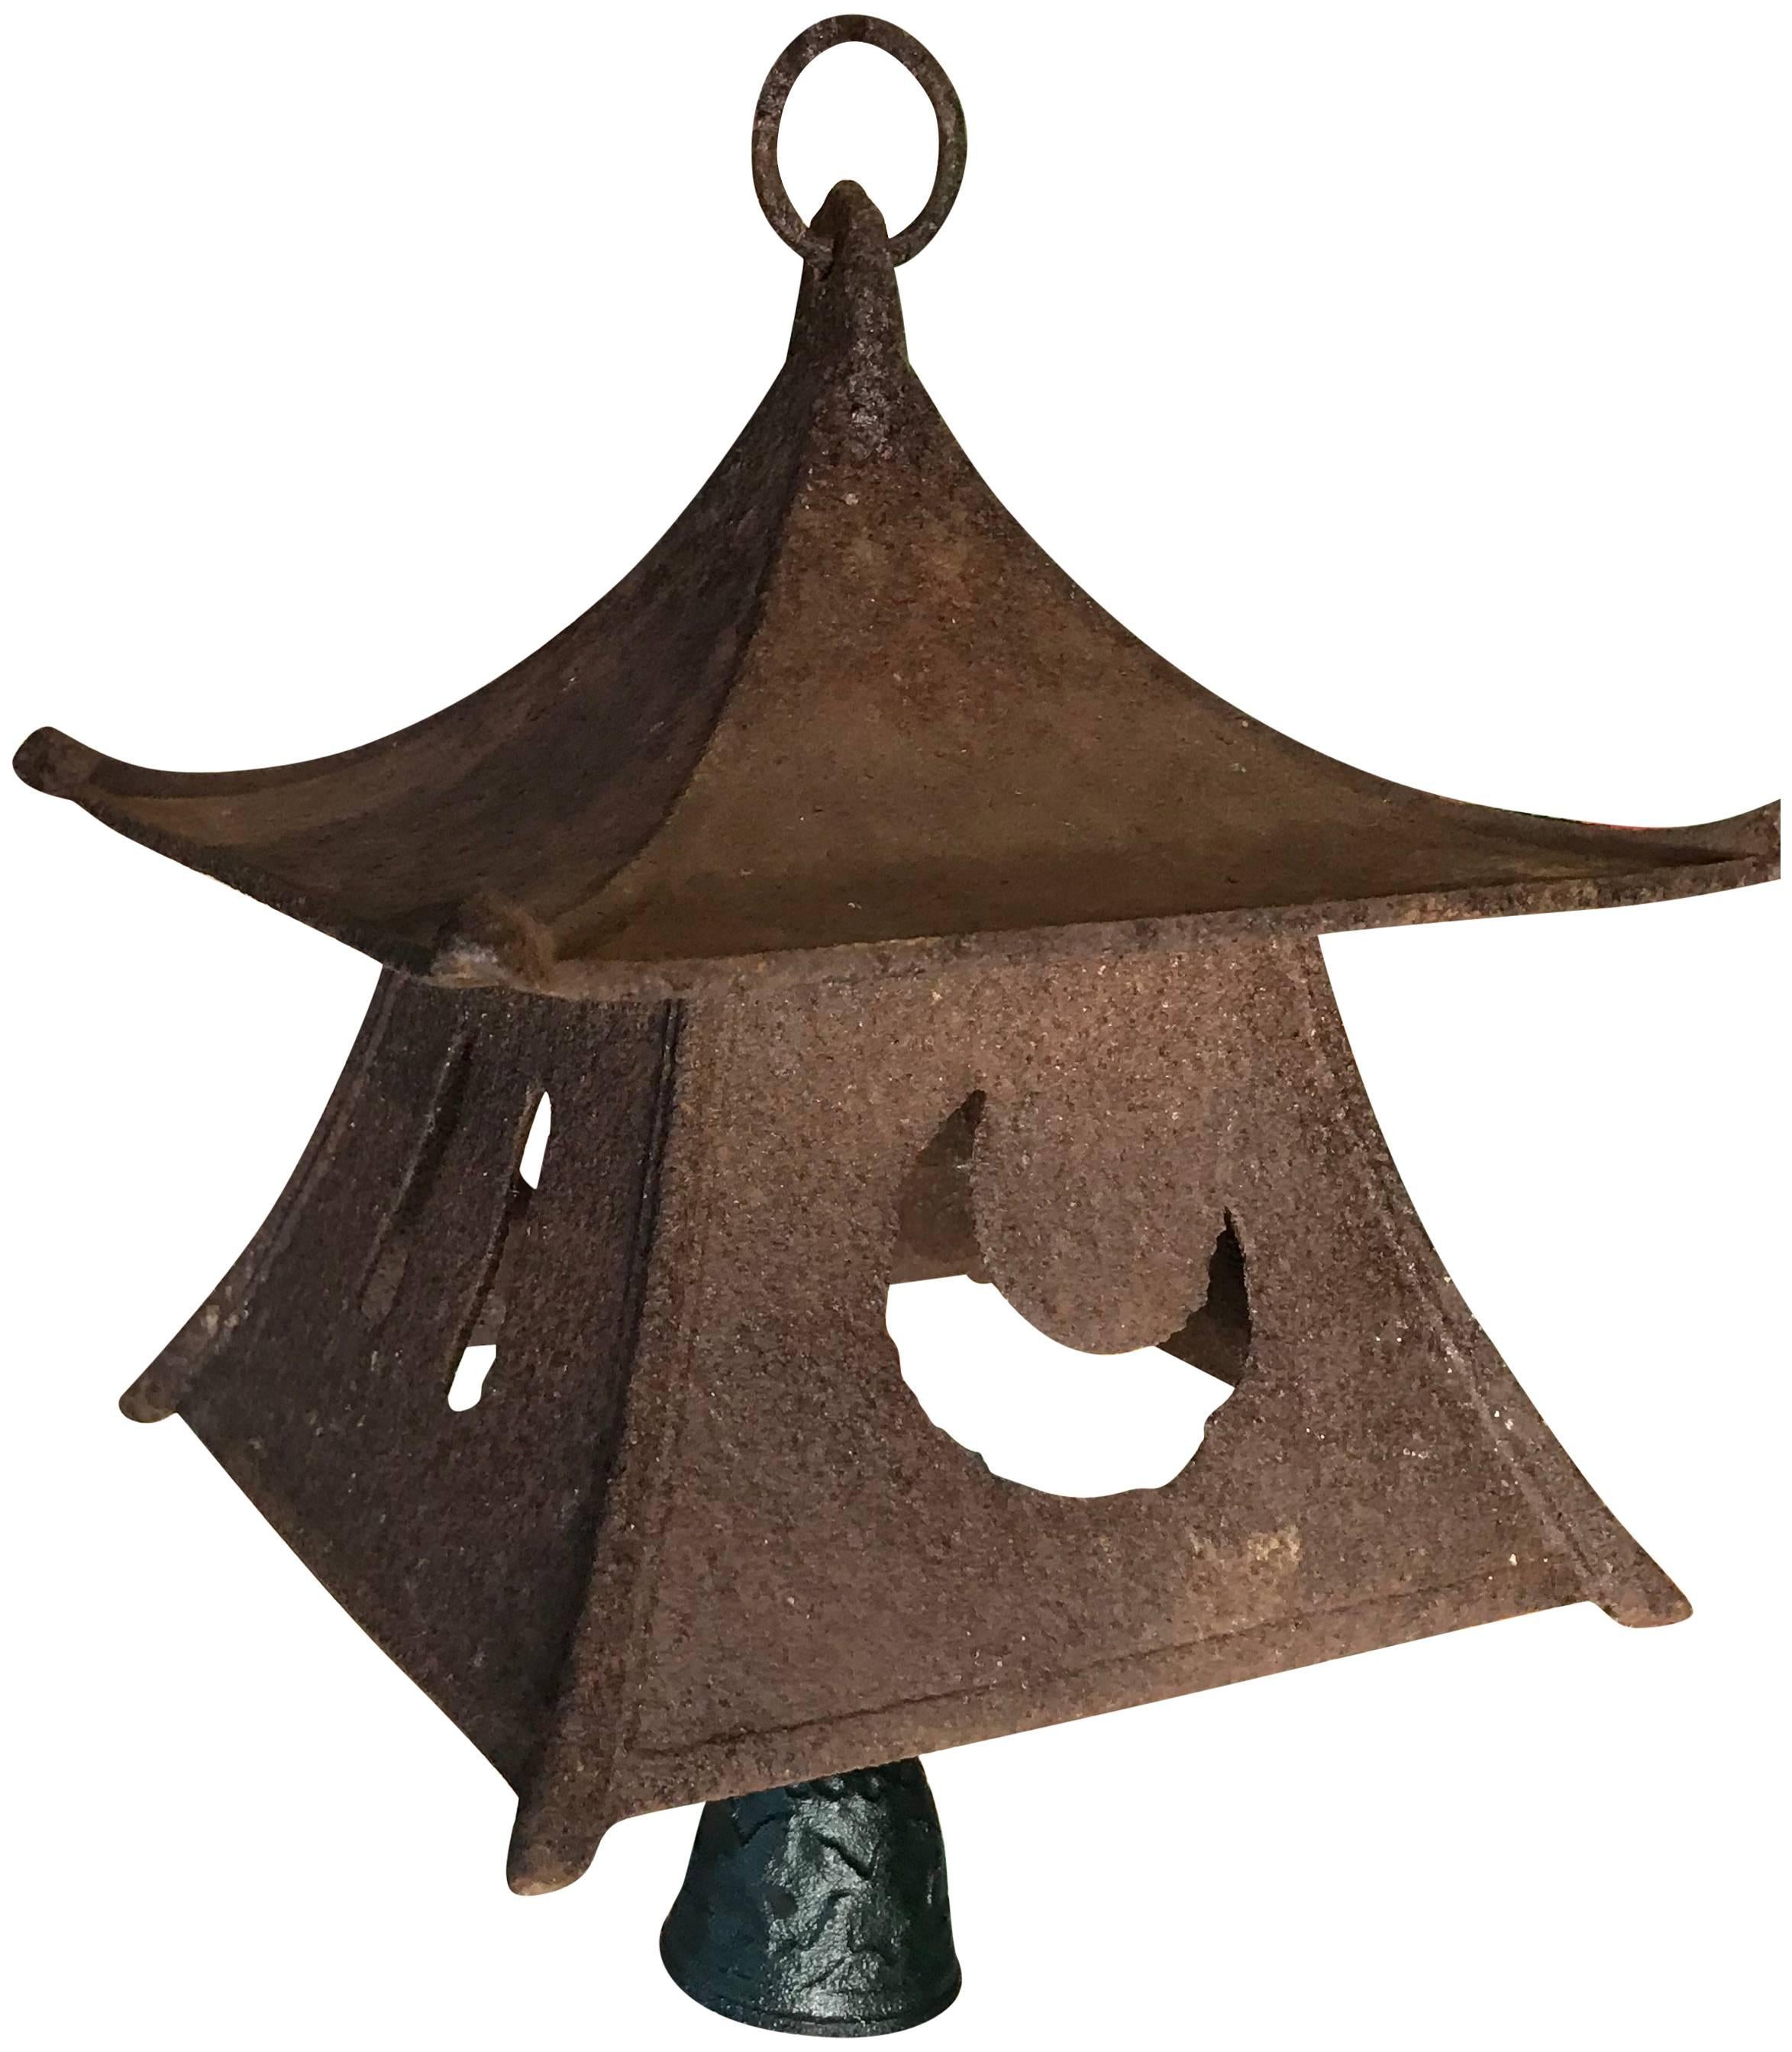 Japanese Large Old Lantern and Wind Chime